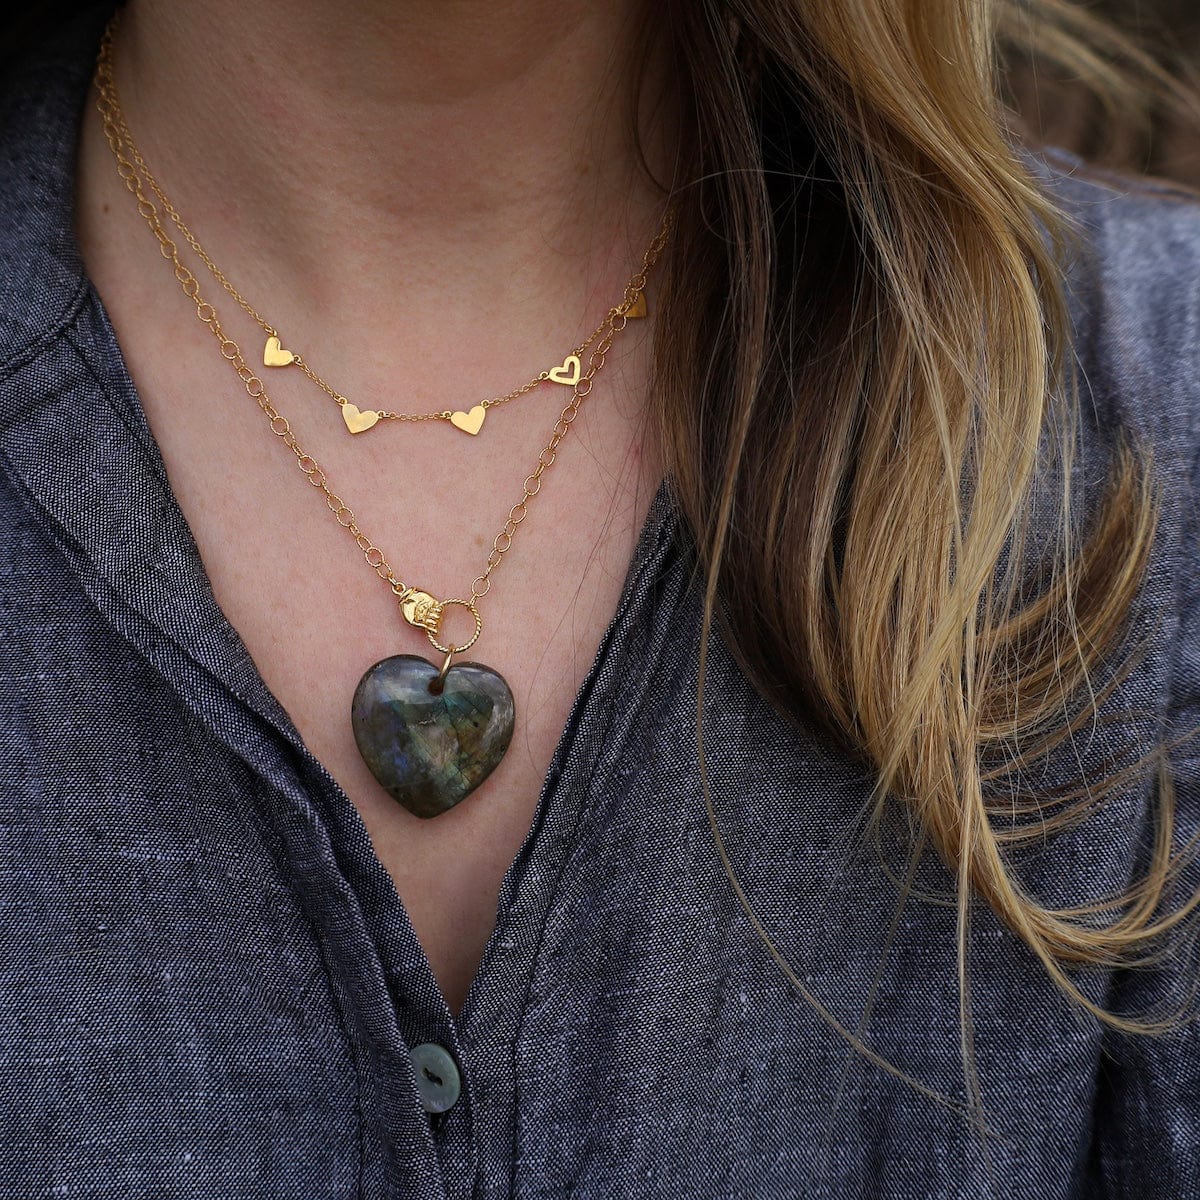 NKL-GPL Labradorite Heart In Hand Necklace